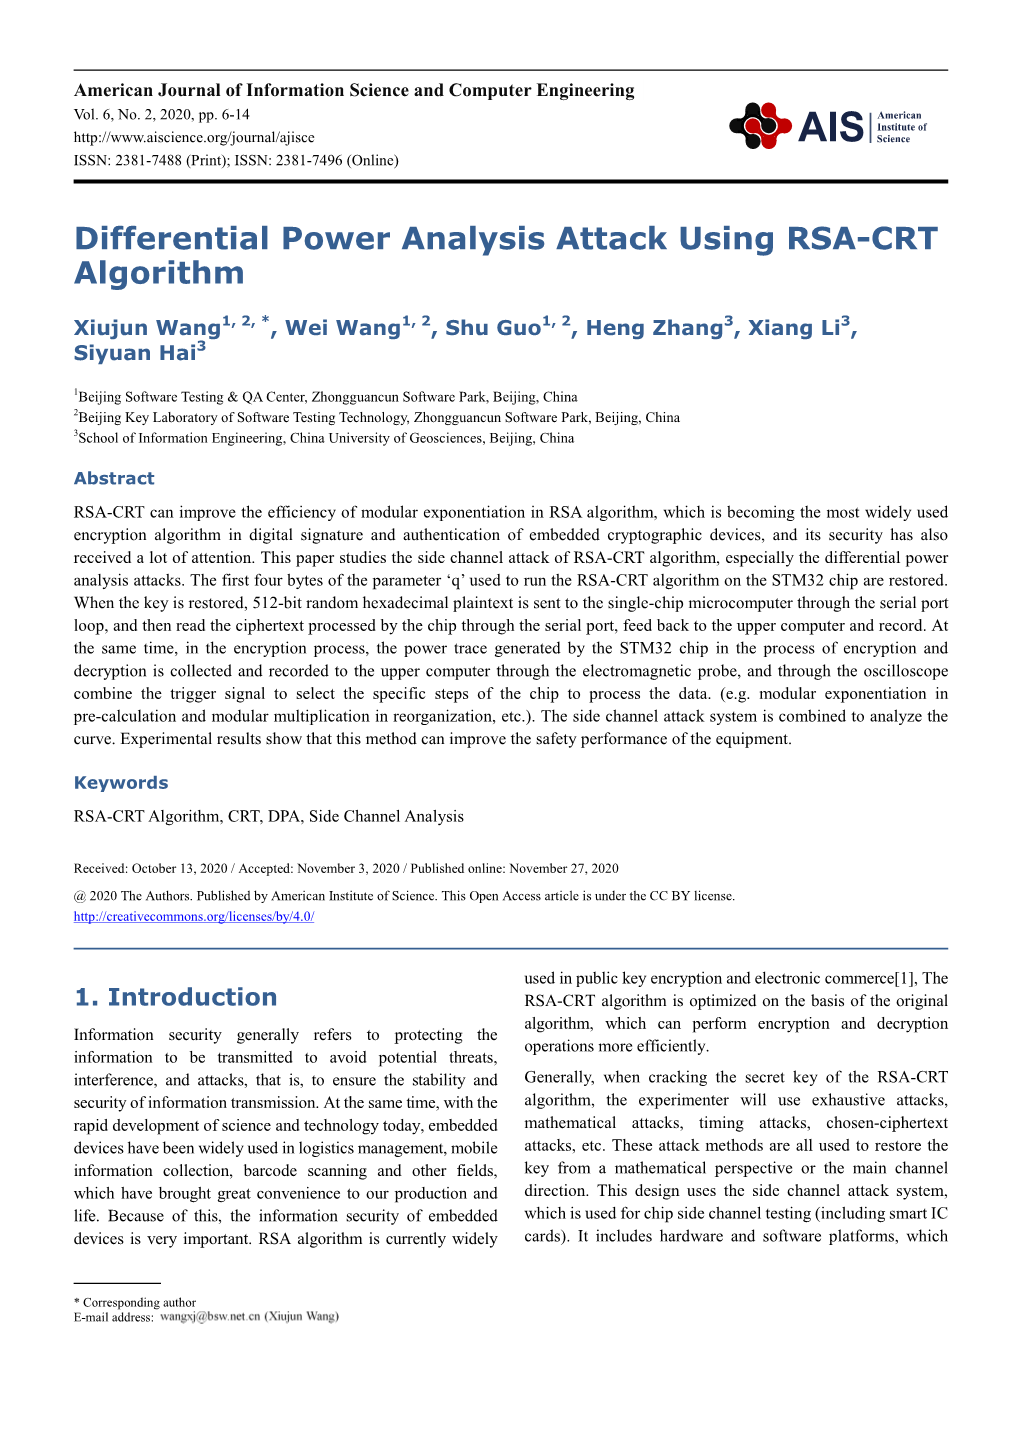 Differential Power Analysis Attack Using RSA-CRT Algorithm